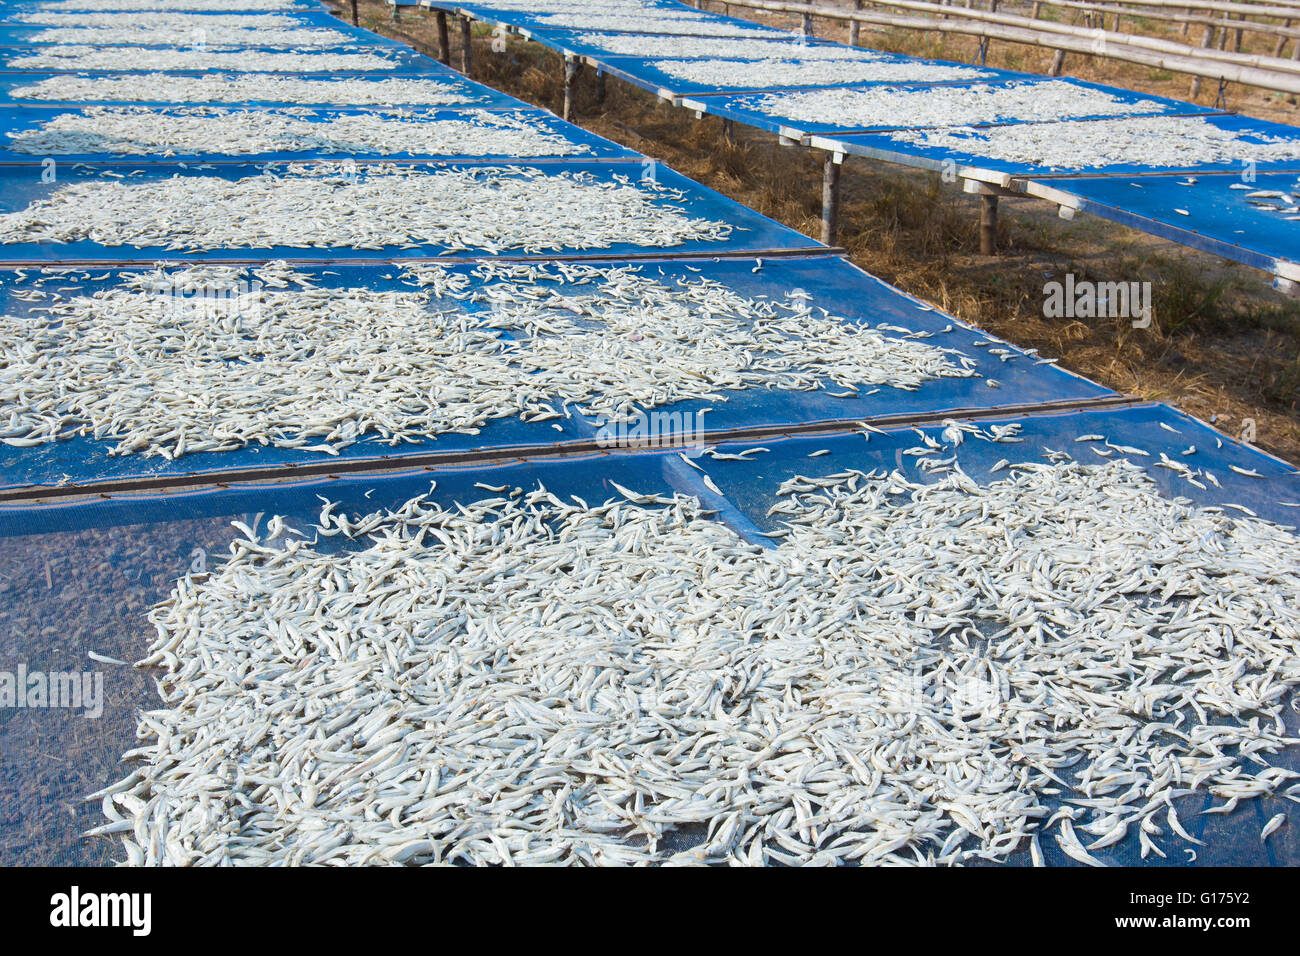 Small salted fish dried under the sun in Chanthaburi province, Thailand Stock Photo